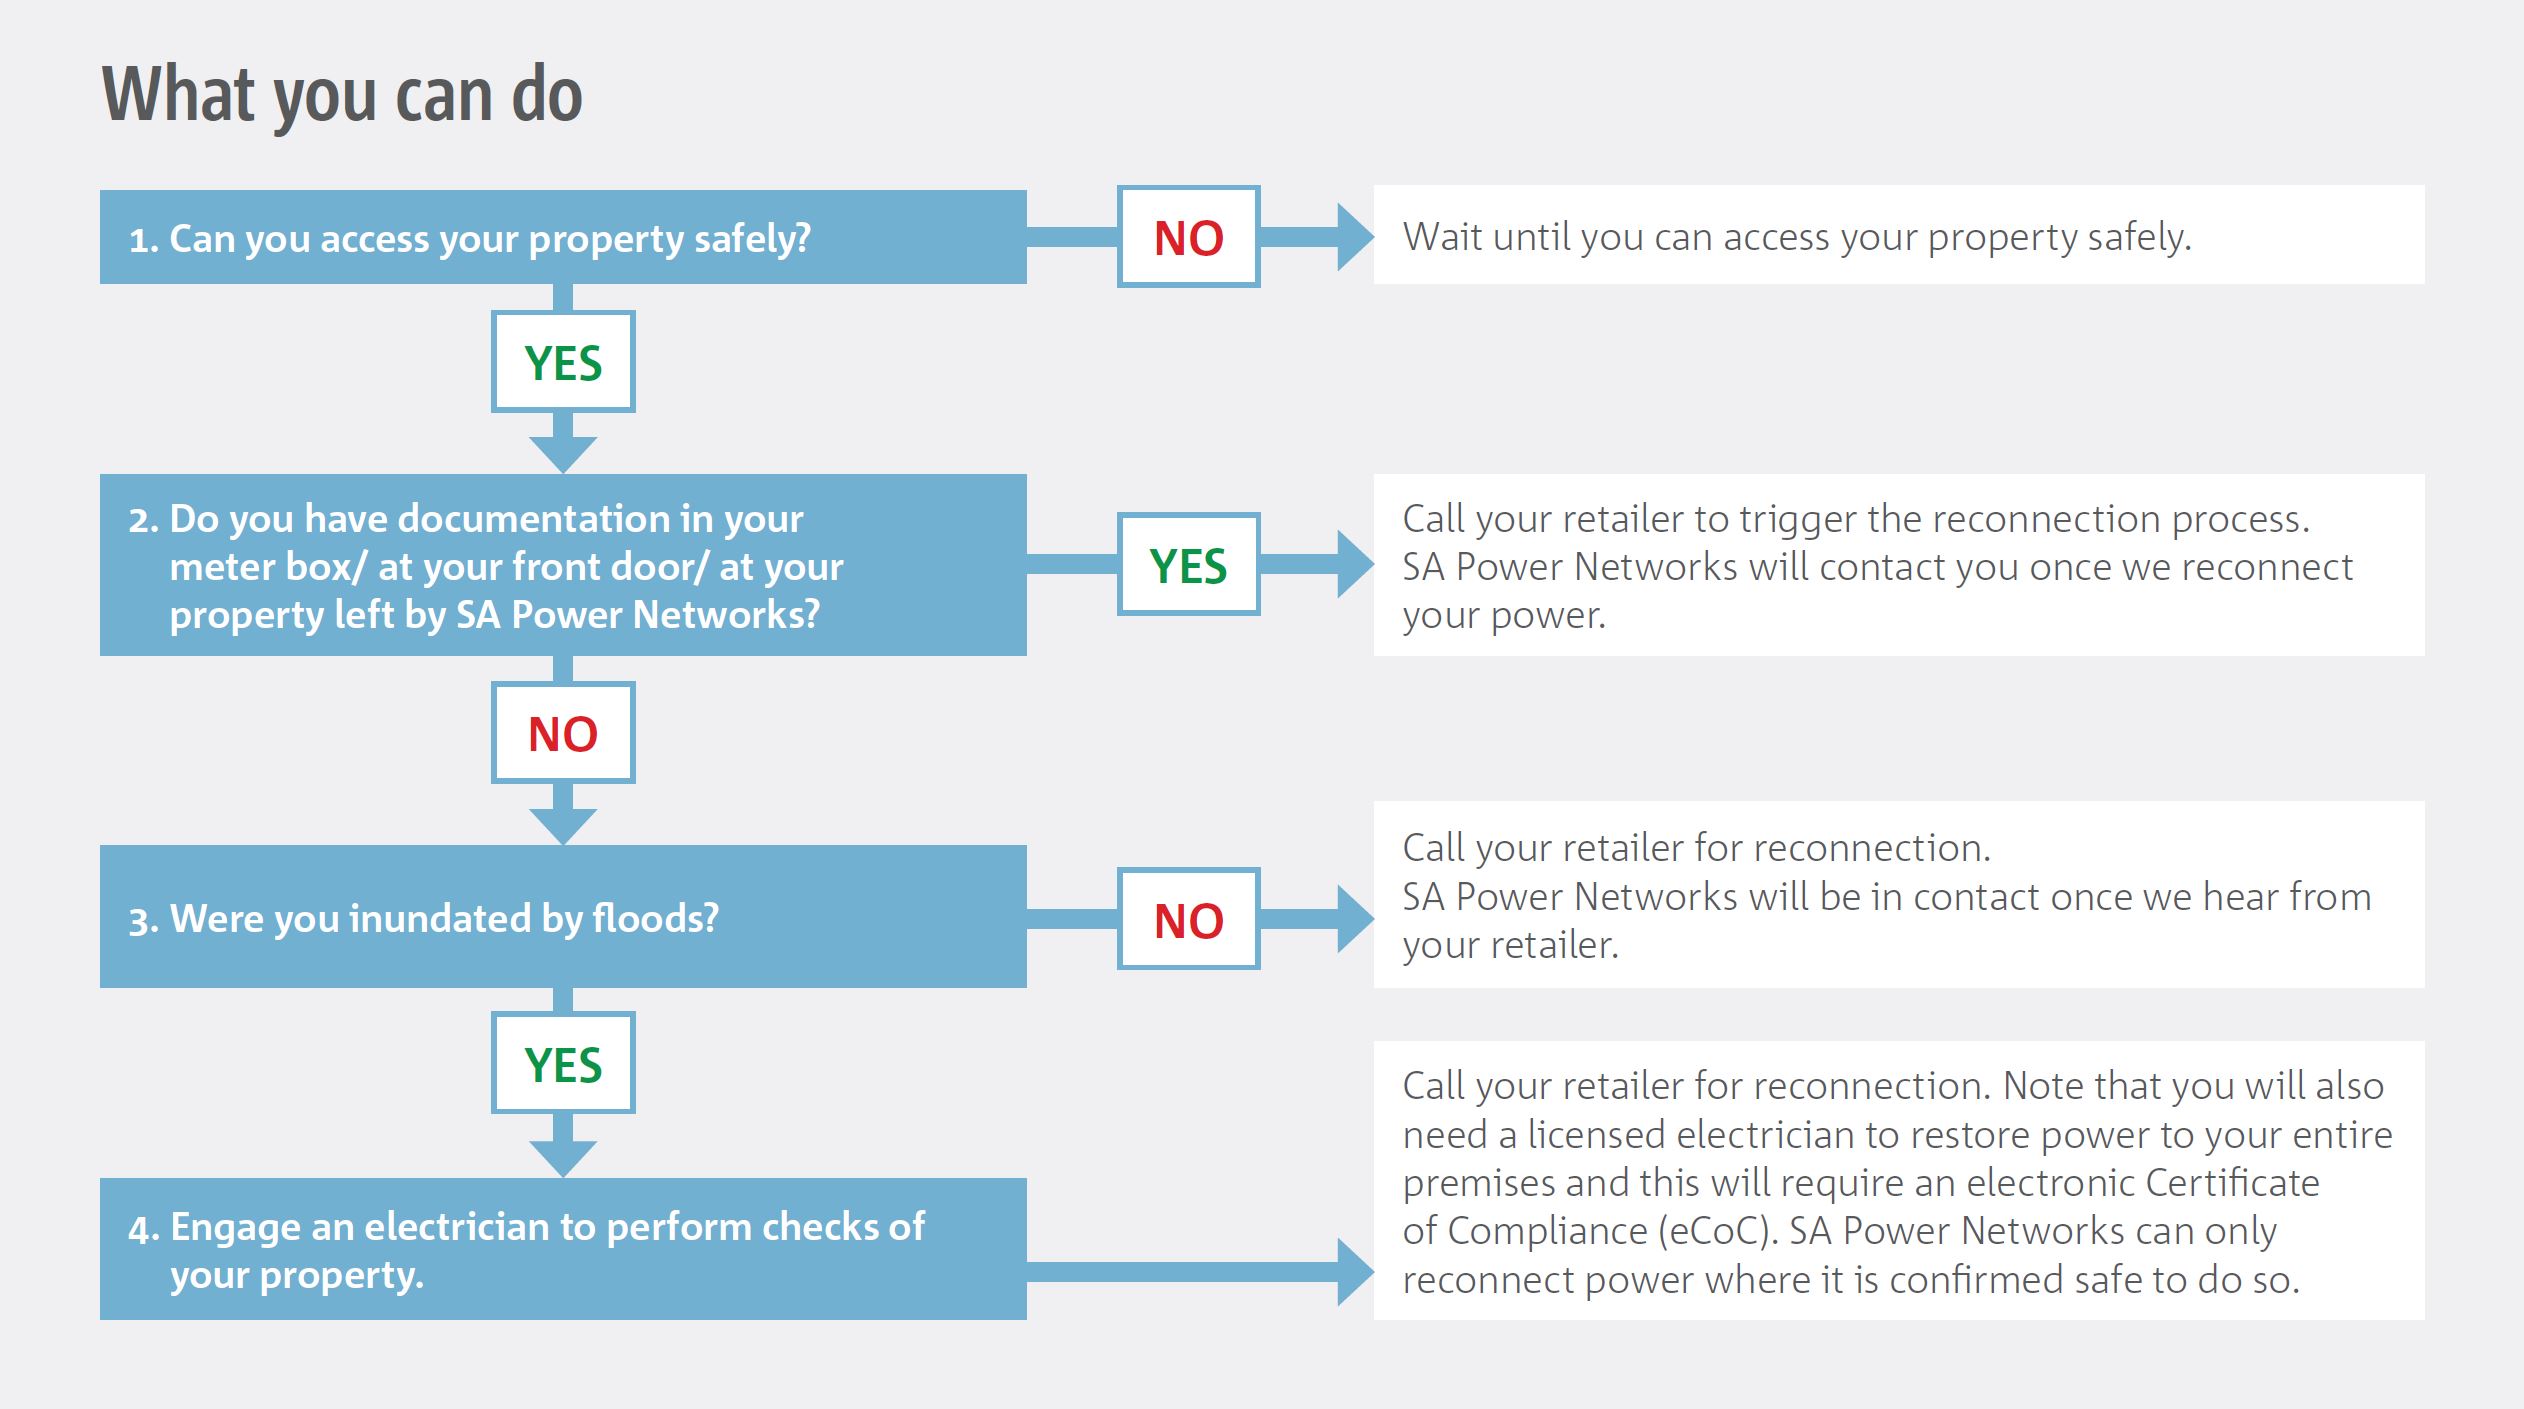 Information to step through a decision tree for what customers can do to prepare for reconnections after flooding.Step 1. Can you access your property safely? If no, then wait until you can access your property safely.If Yes, then move to step 2.Step 2. Do you have documentation in your meter box or at your front door or at your property ;eft by SA Power Networks?If yes, Call your retailer to trigger the reconnection process. SA Power Networks will contact you once we reconnect your power.If no, move to step 3.Step 3. Were you inundated by floods?If no, Call your retailer for reconnection. SA Power Networks will be in contact once we hear from your retailerIf yes, move to step 4.Step 4. Engage an electrician to perform checks of your property.Call your retailer for reconnection. Note that you will also need a licensed electrician to restore power to your entire premises and this will require an eCoC. SA Power Networks can only reconnect power where it is confirmed safe to do so.